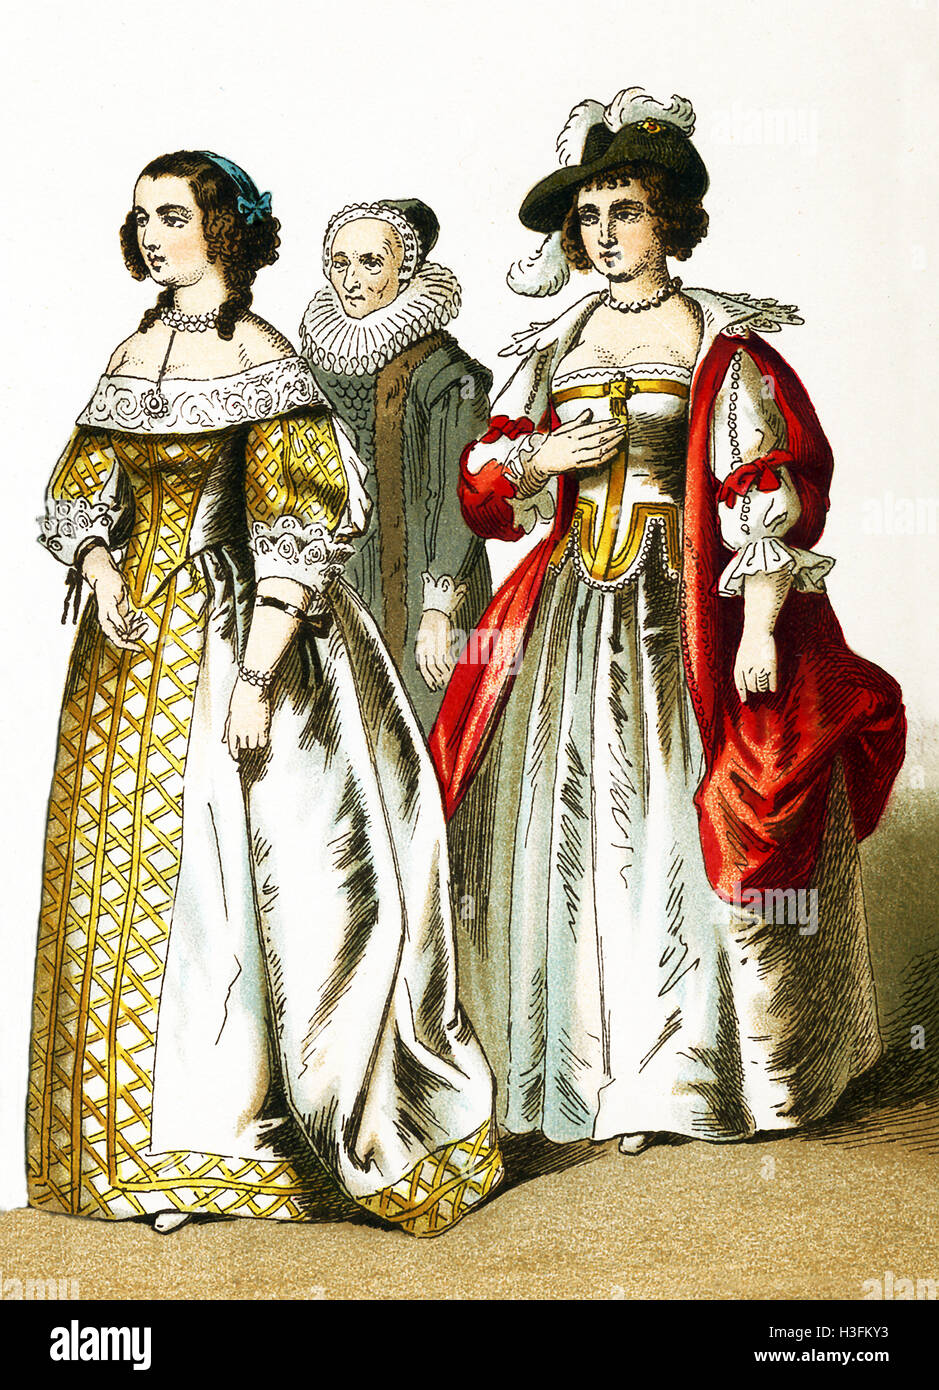 The figures illustrated here are women of various classes in the Netherlands in 1600. The illustration dates to 1882. Stock Photo